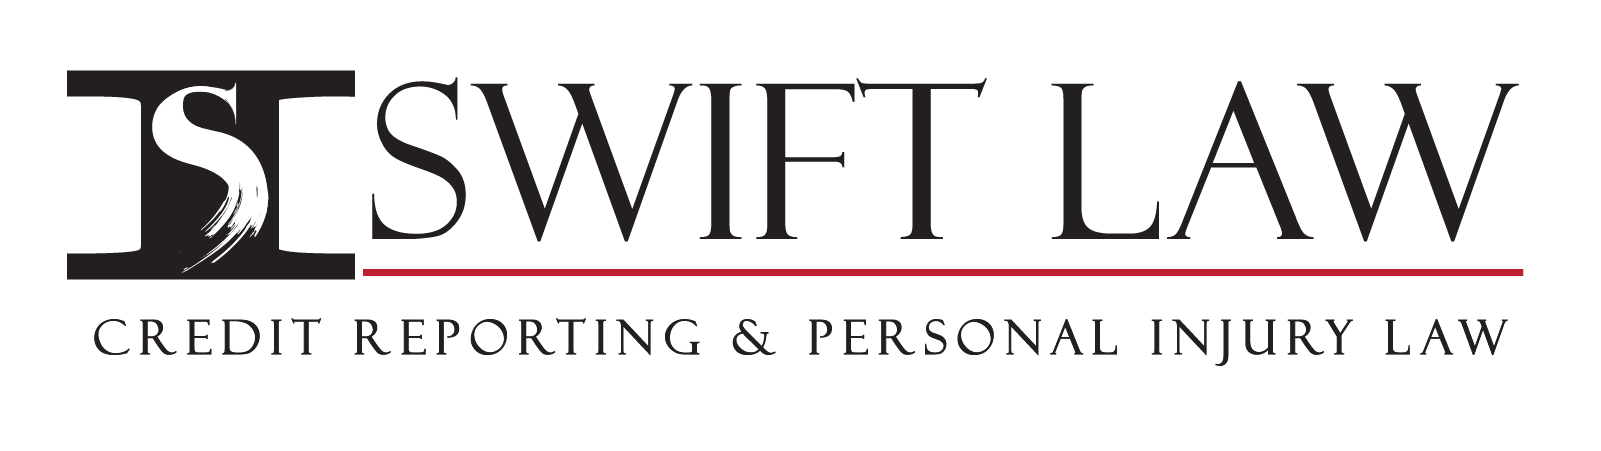 Swift-Law-22-logo-wide-black-with-tag